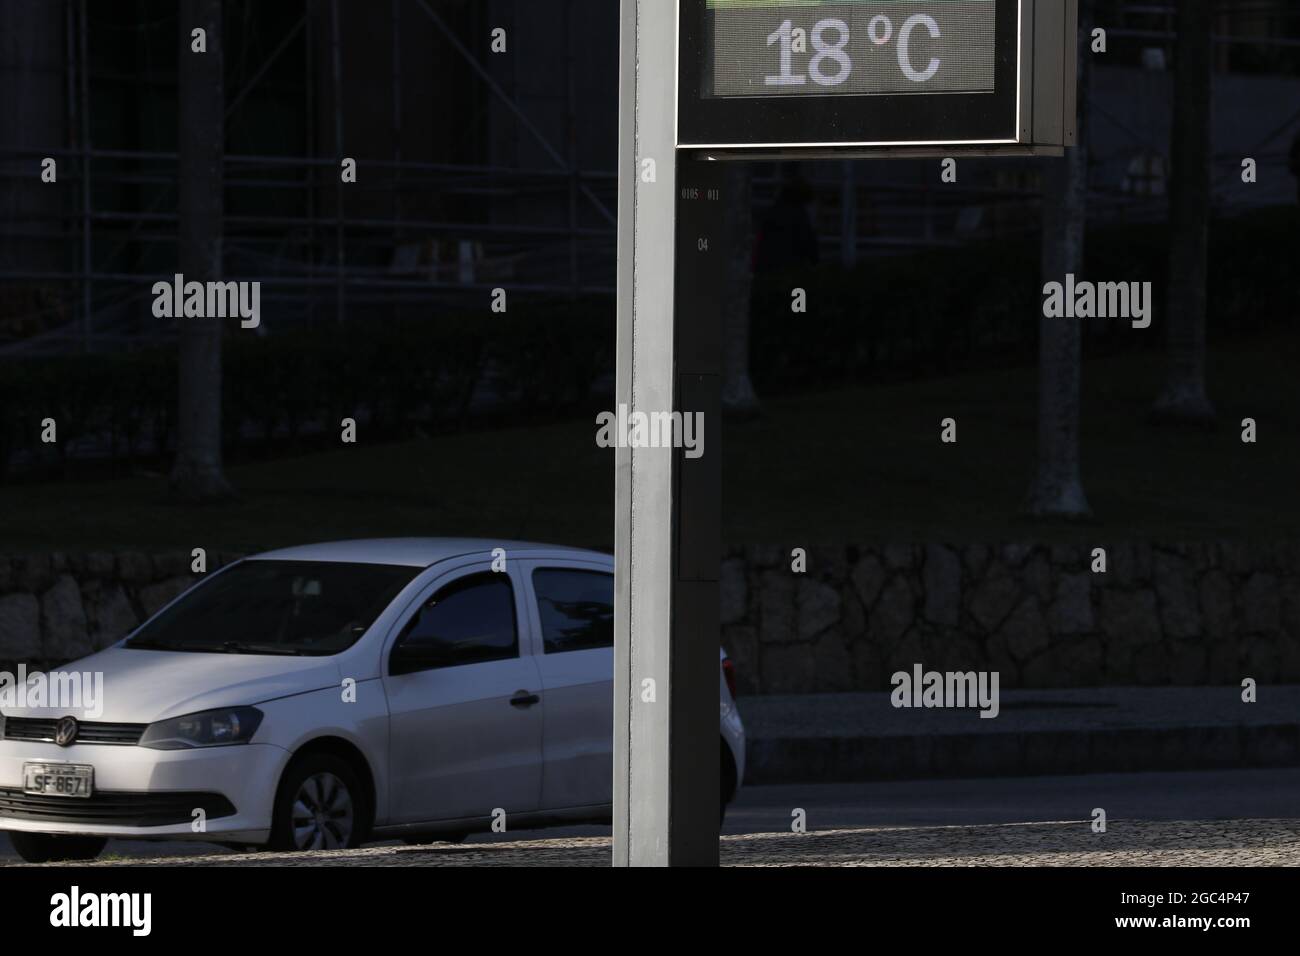 https://c8.alamy.com/comp/2GC4P47/temperature-thermometer-on-street-displays-digital-celsius-degrees-meteorology-and-weather-device-climate-change-global-warming-indicator-2GC4P47.jpg